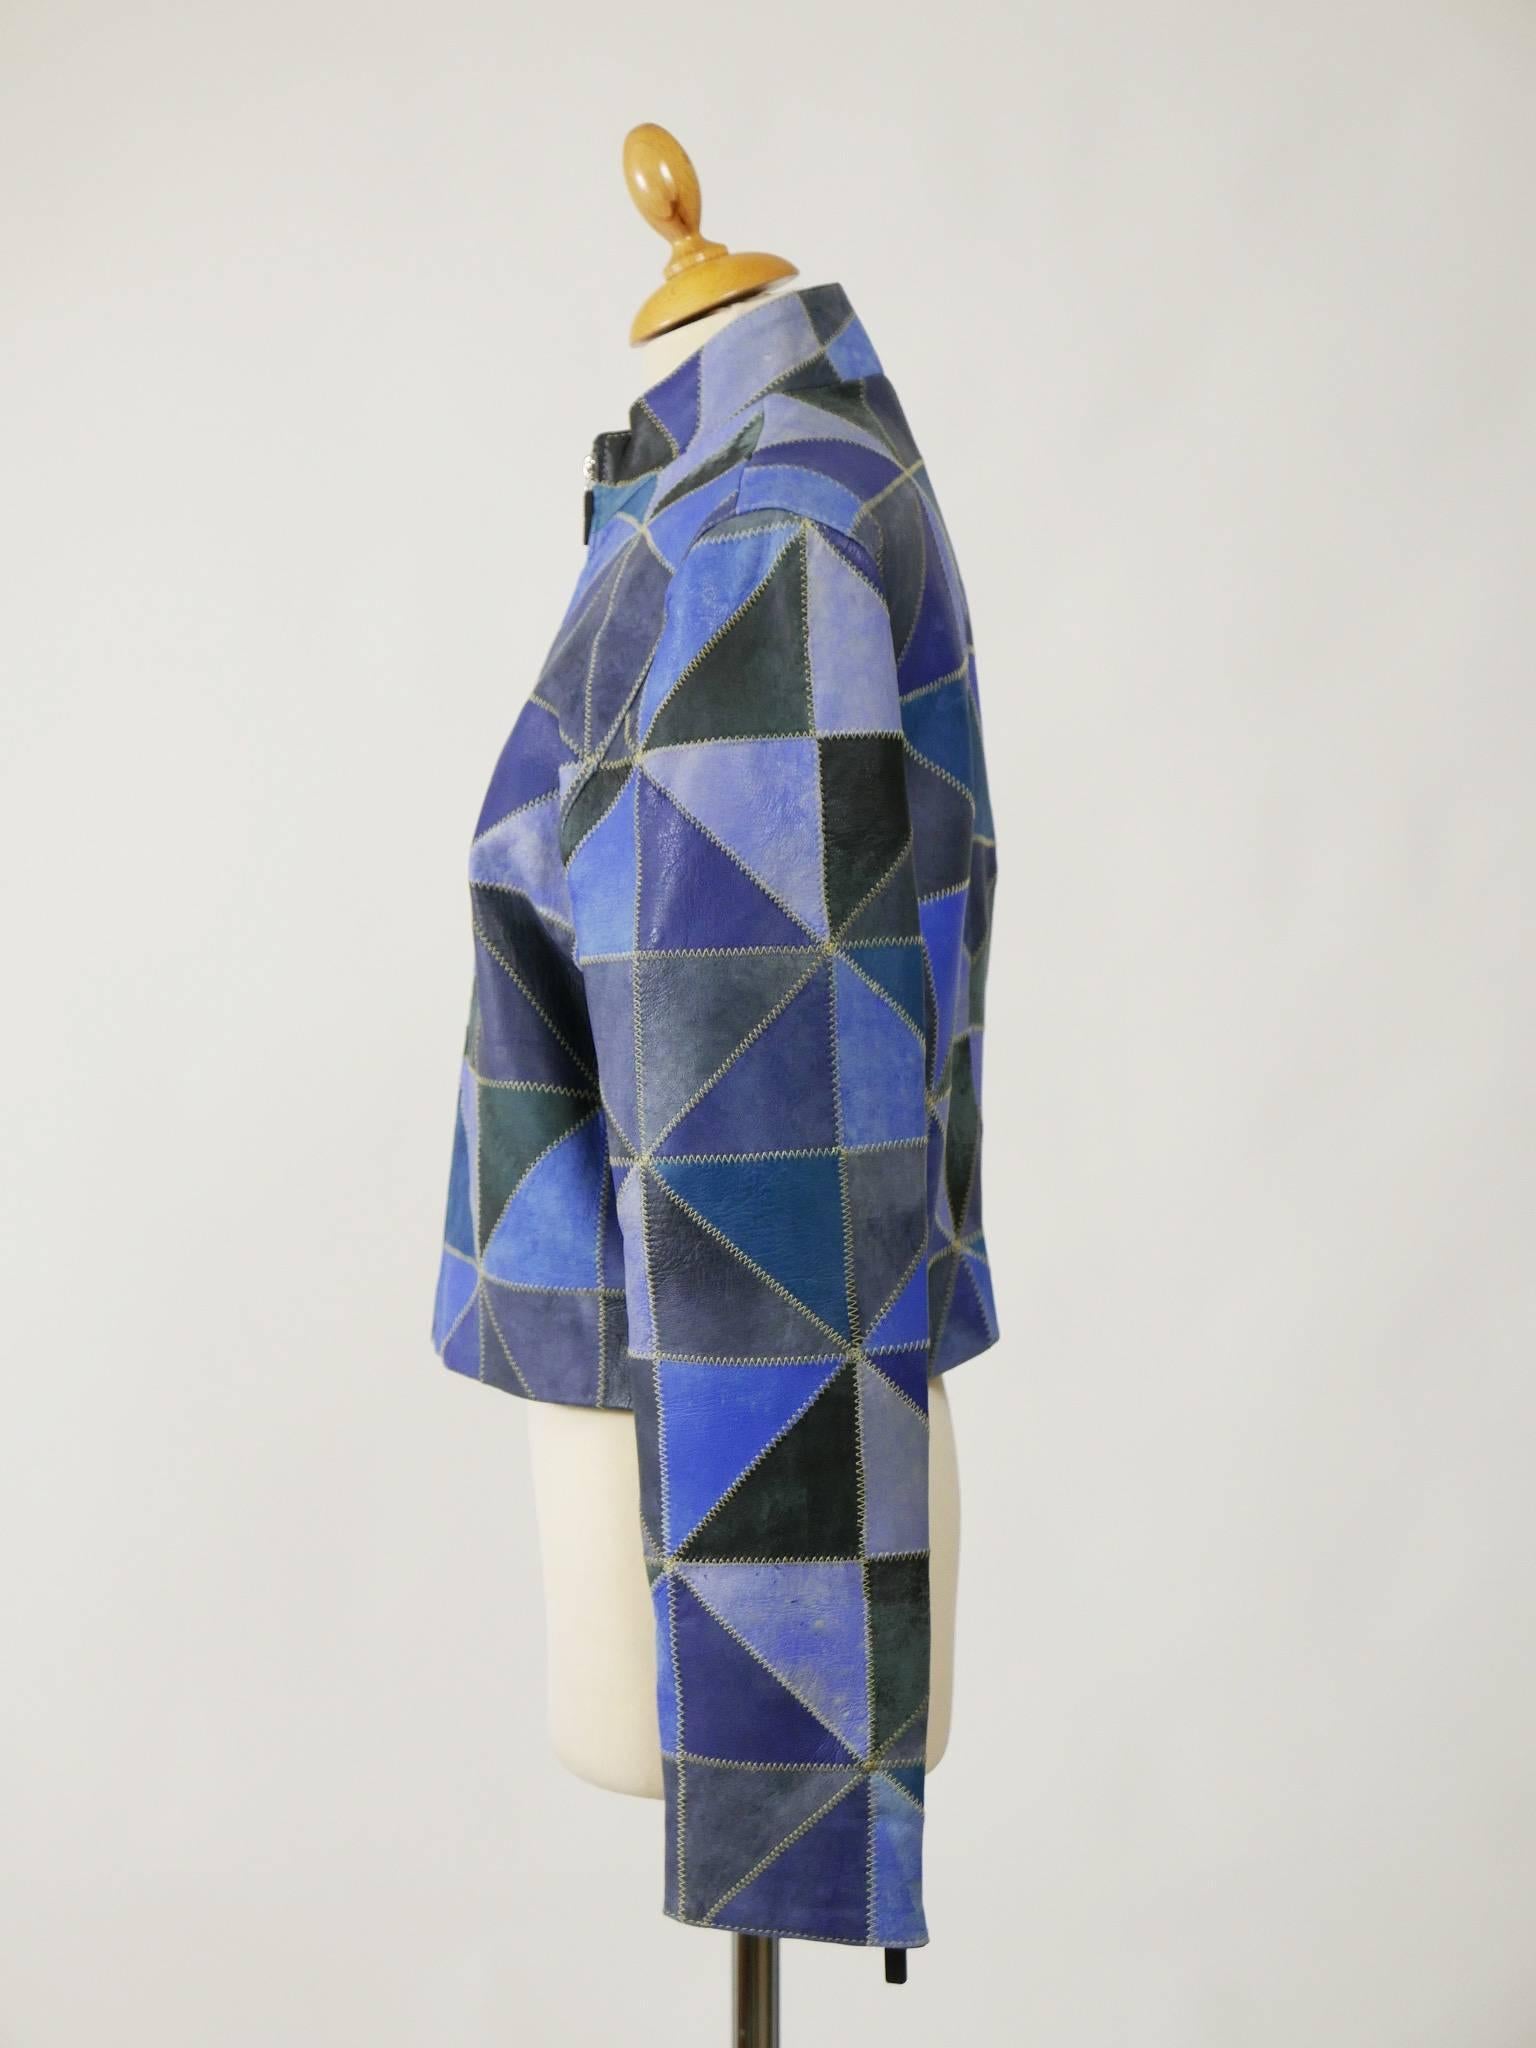 This lovely Kenzo jacket is made with a blue patchwork soft leather. It has long sleeves, mandarin collar, inside pockets, zip closure and is fully lined.

Good vintage condition. 

Label: Kenzo Jeans
Fabric: leather
Color: